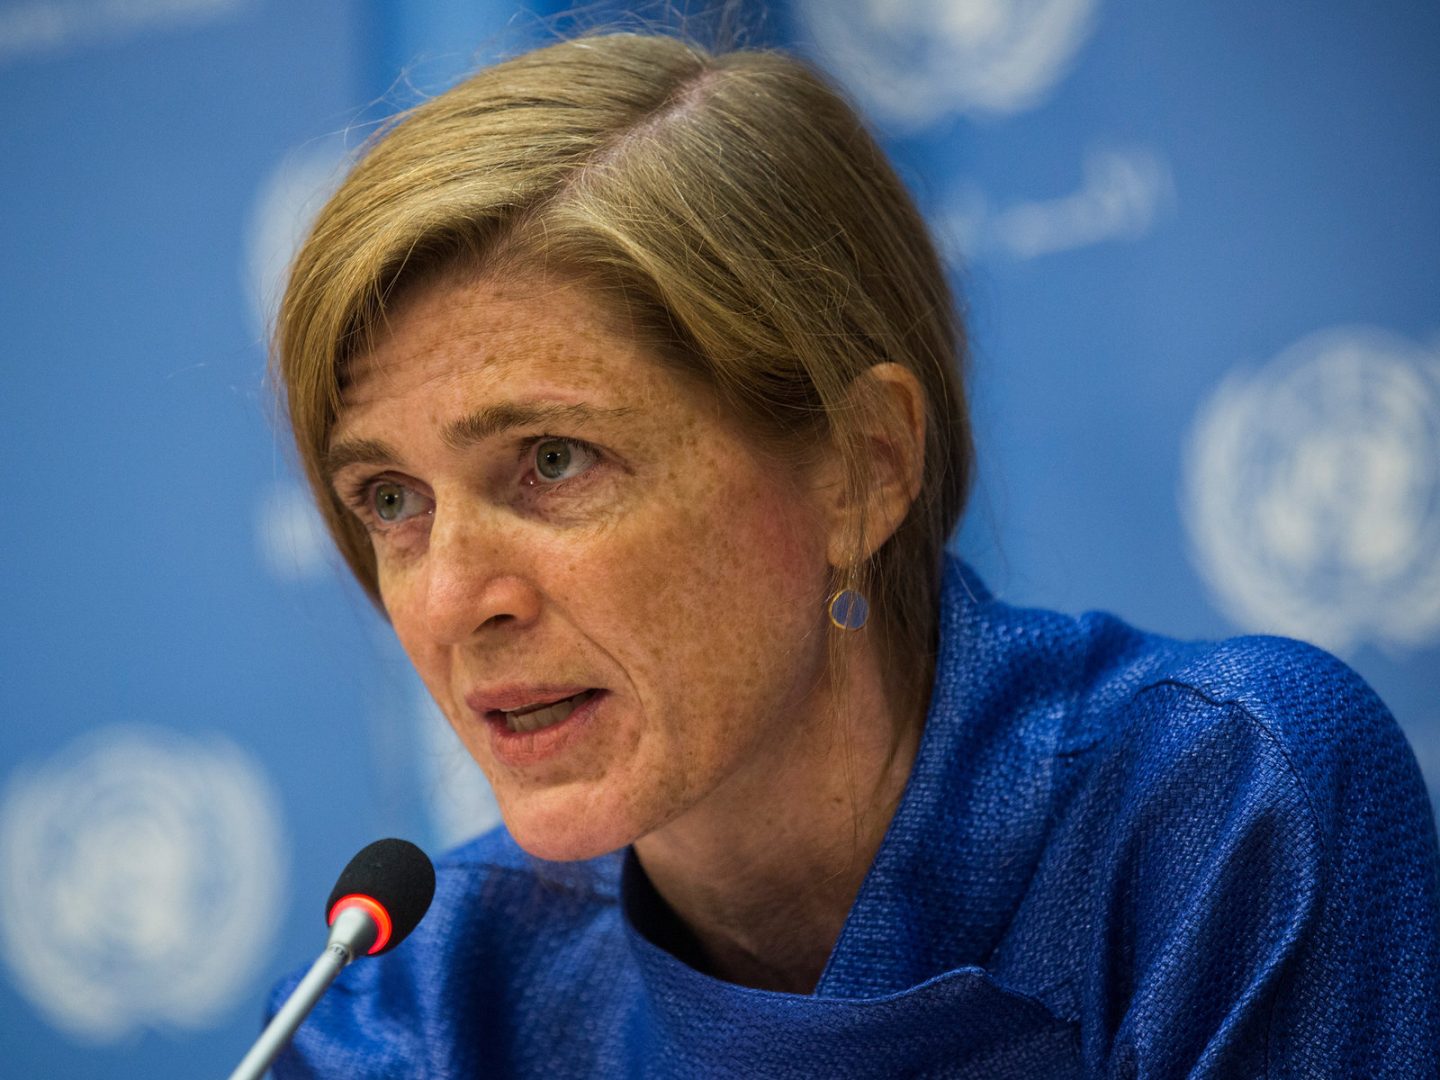 Watch - USAID’s Samantha Power calls for UN assessment mission in Nagorno Karabakh